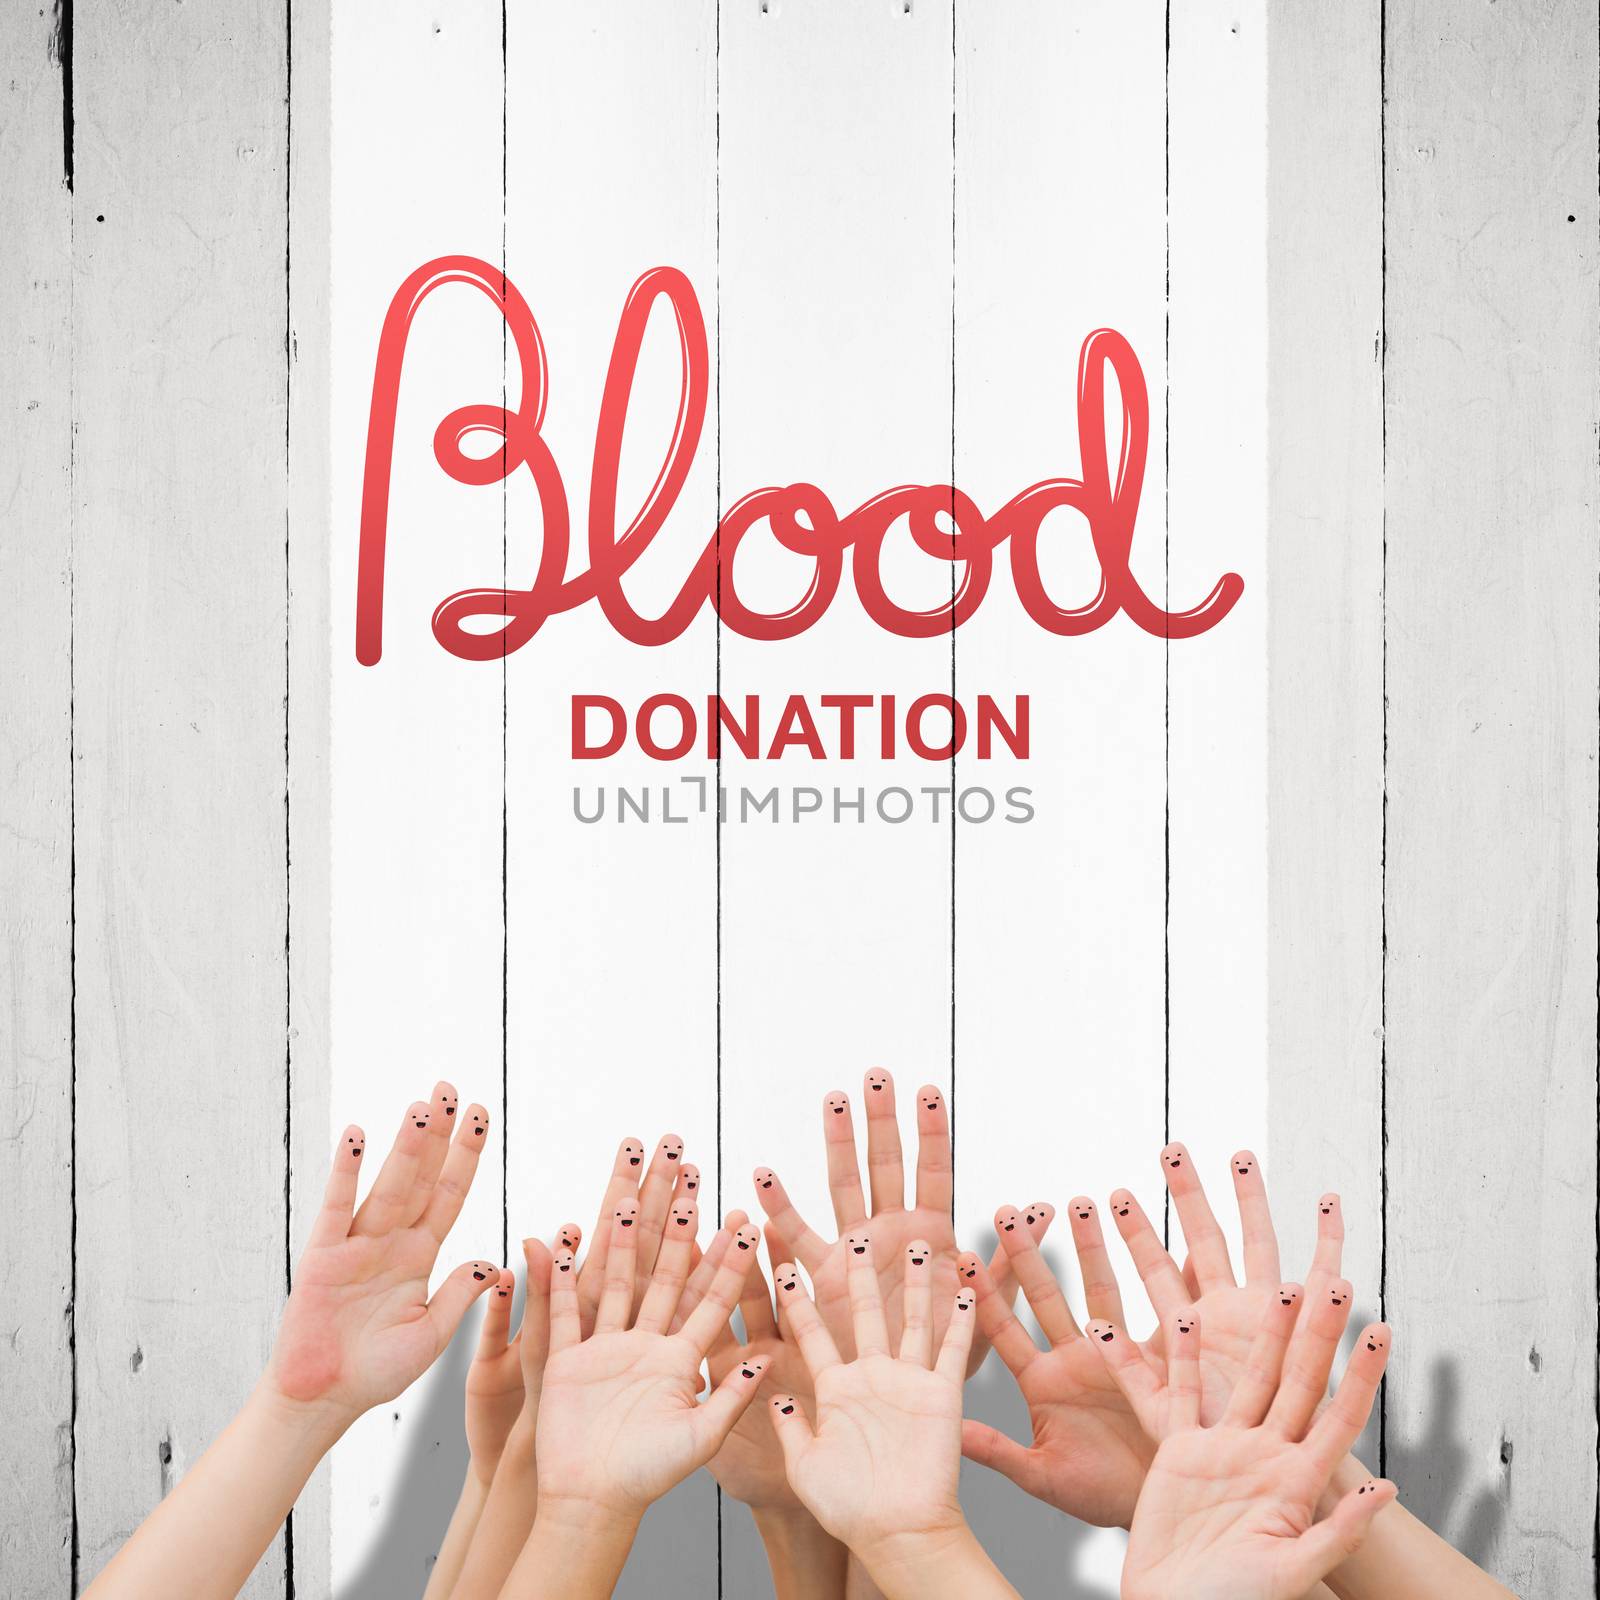 Blood donation against white wood